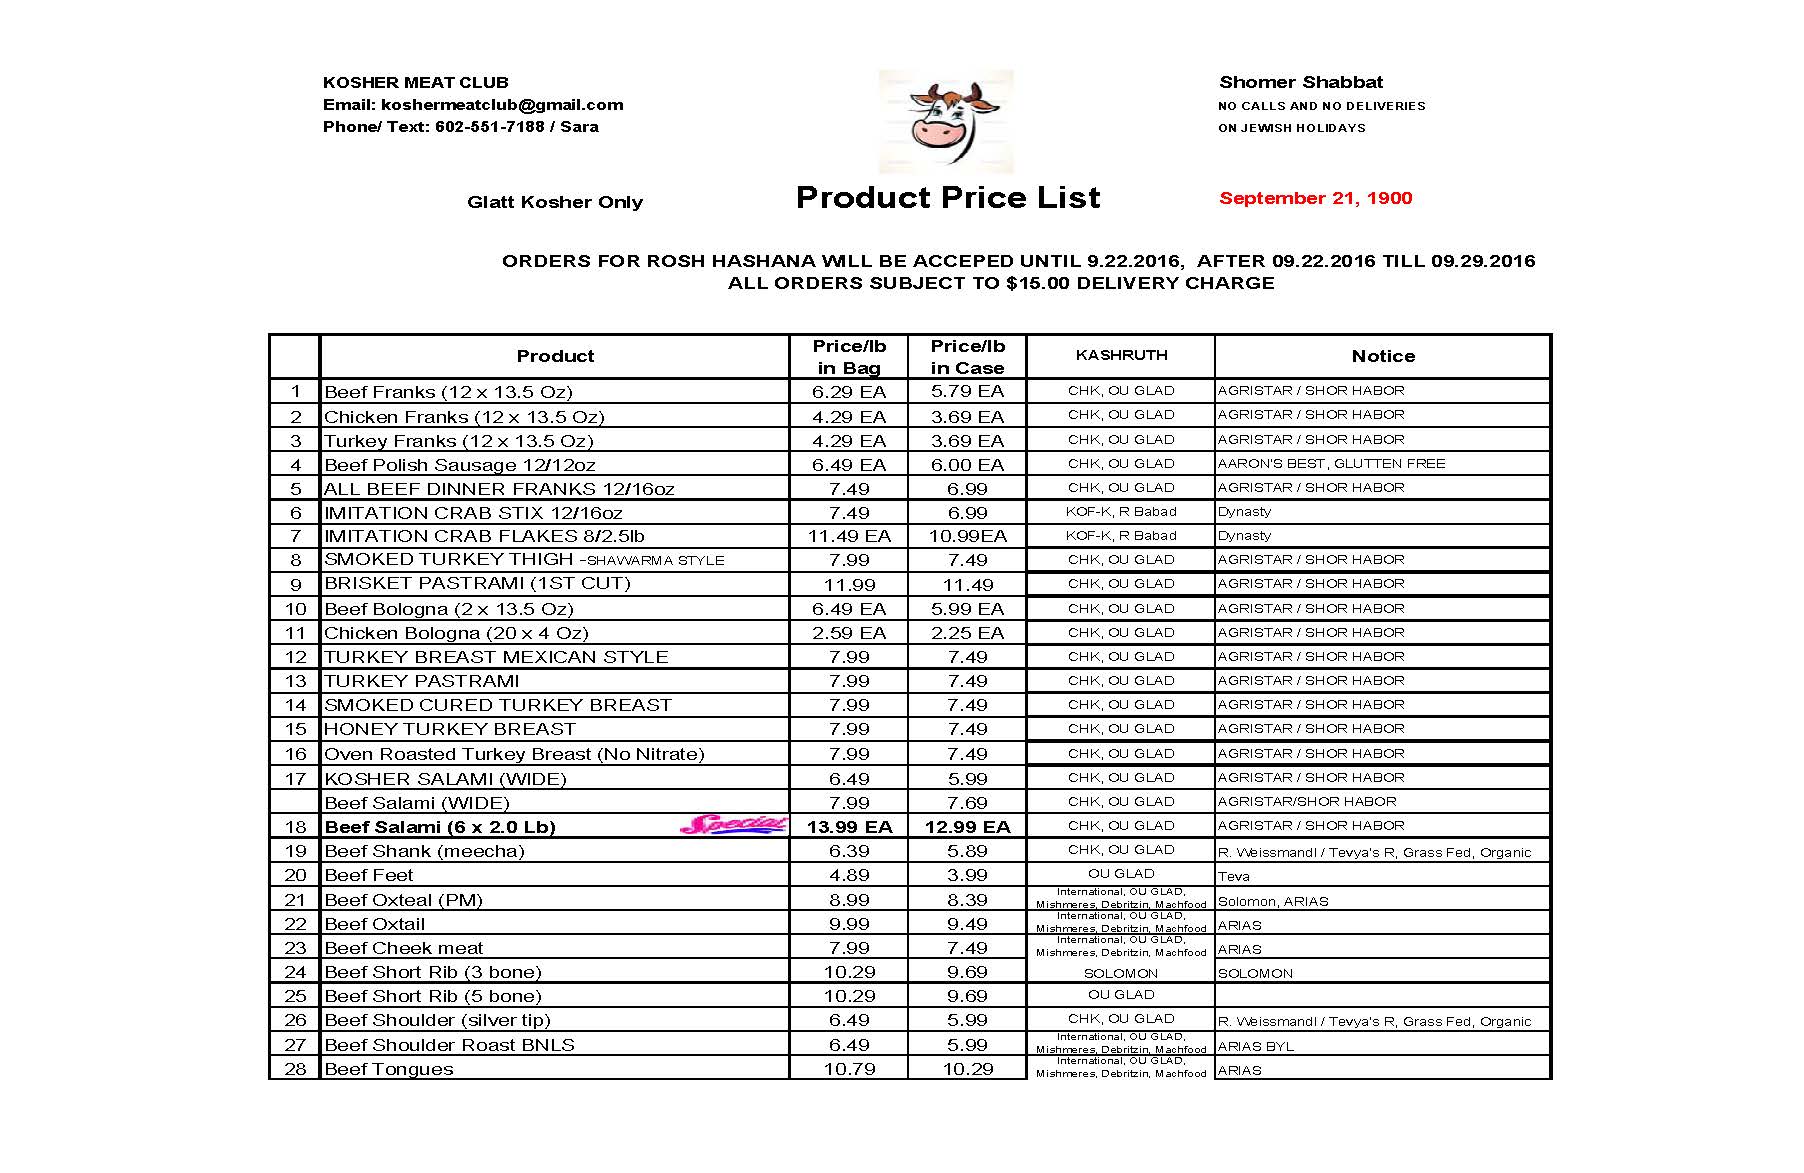 kmc-product-price-list_page_1